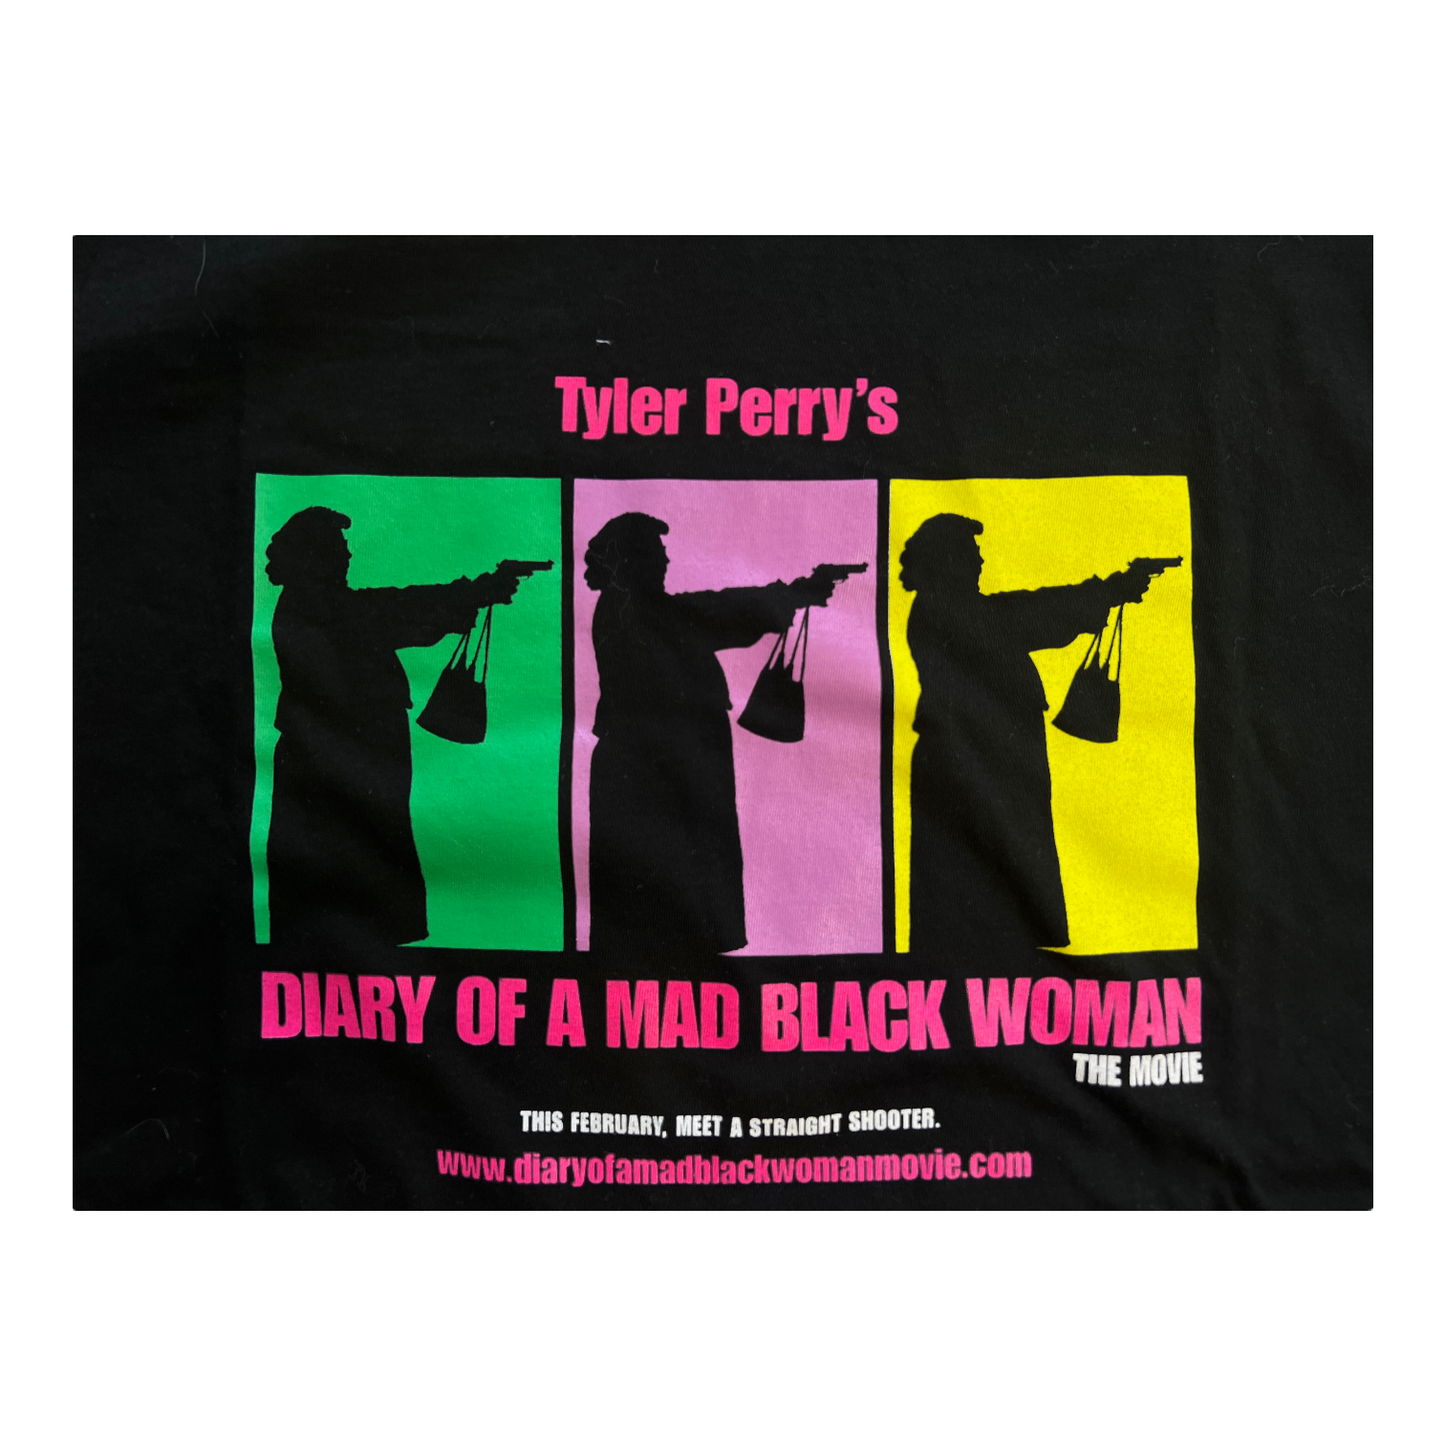 Tyler Perry’s “DIARY OF A MAD BLACK WOMAN”